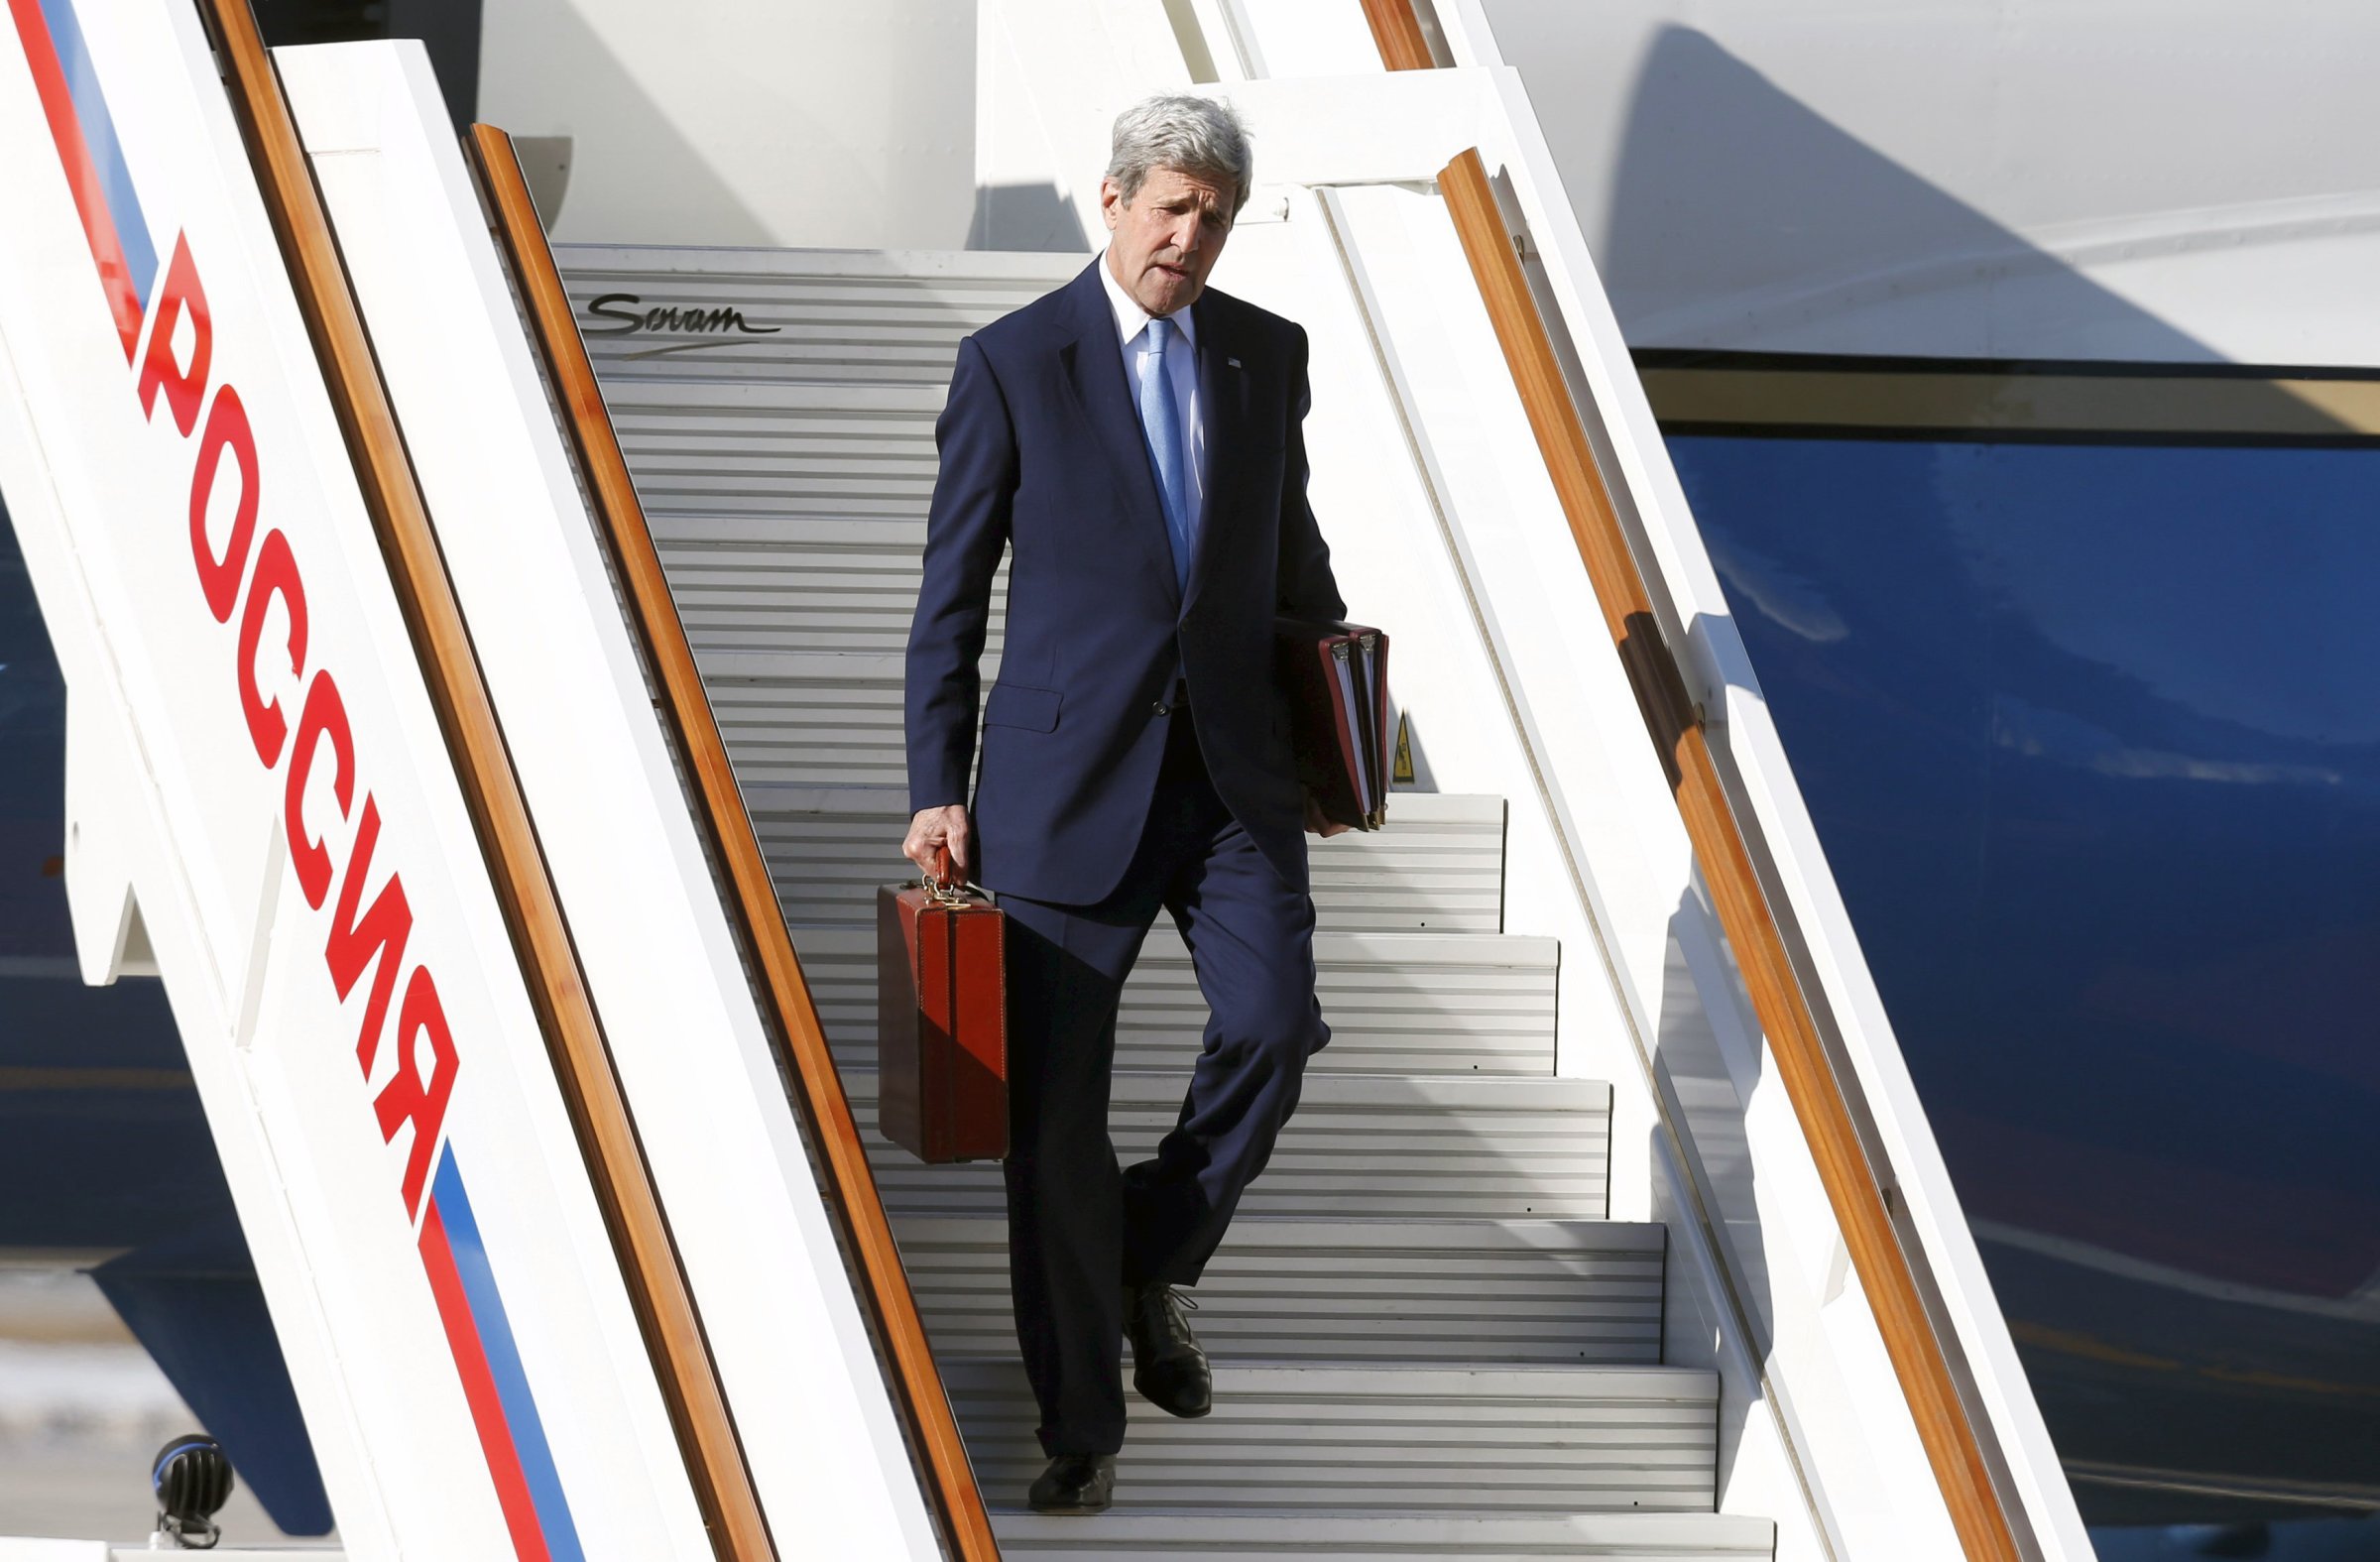 U.S. Secretary of State John Kerry carries his briefcase as he arrives at Moscow's Vnukovo airport in Russia, on March 23, 2016.